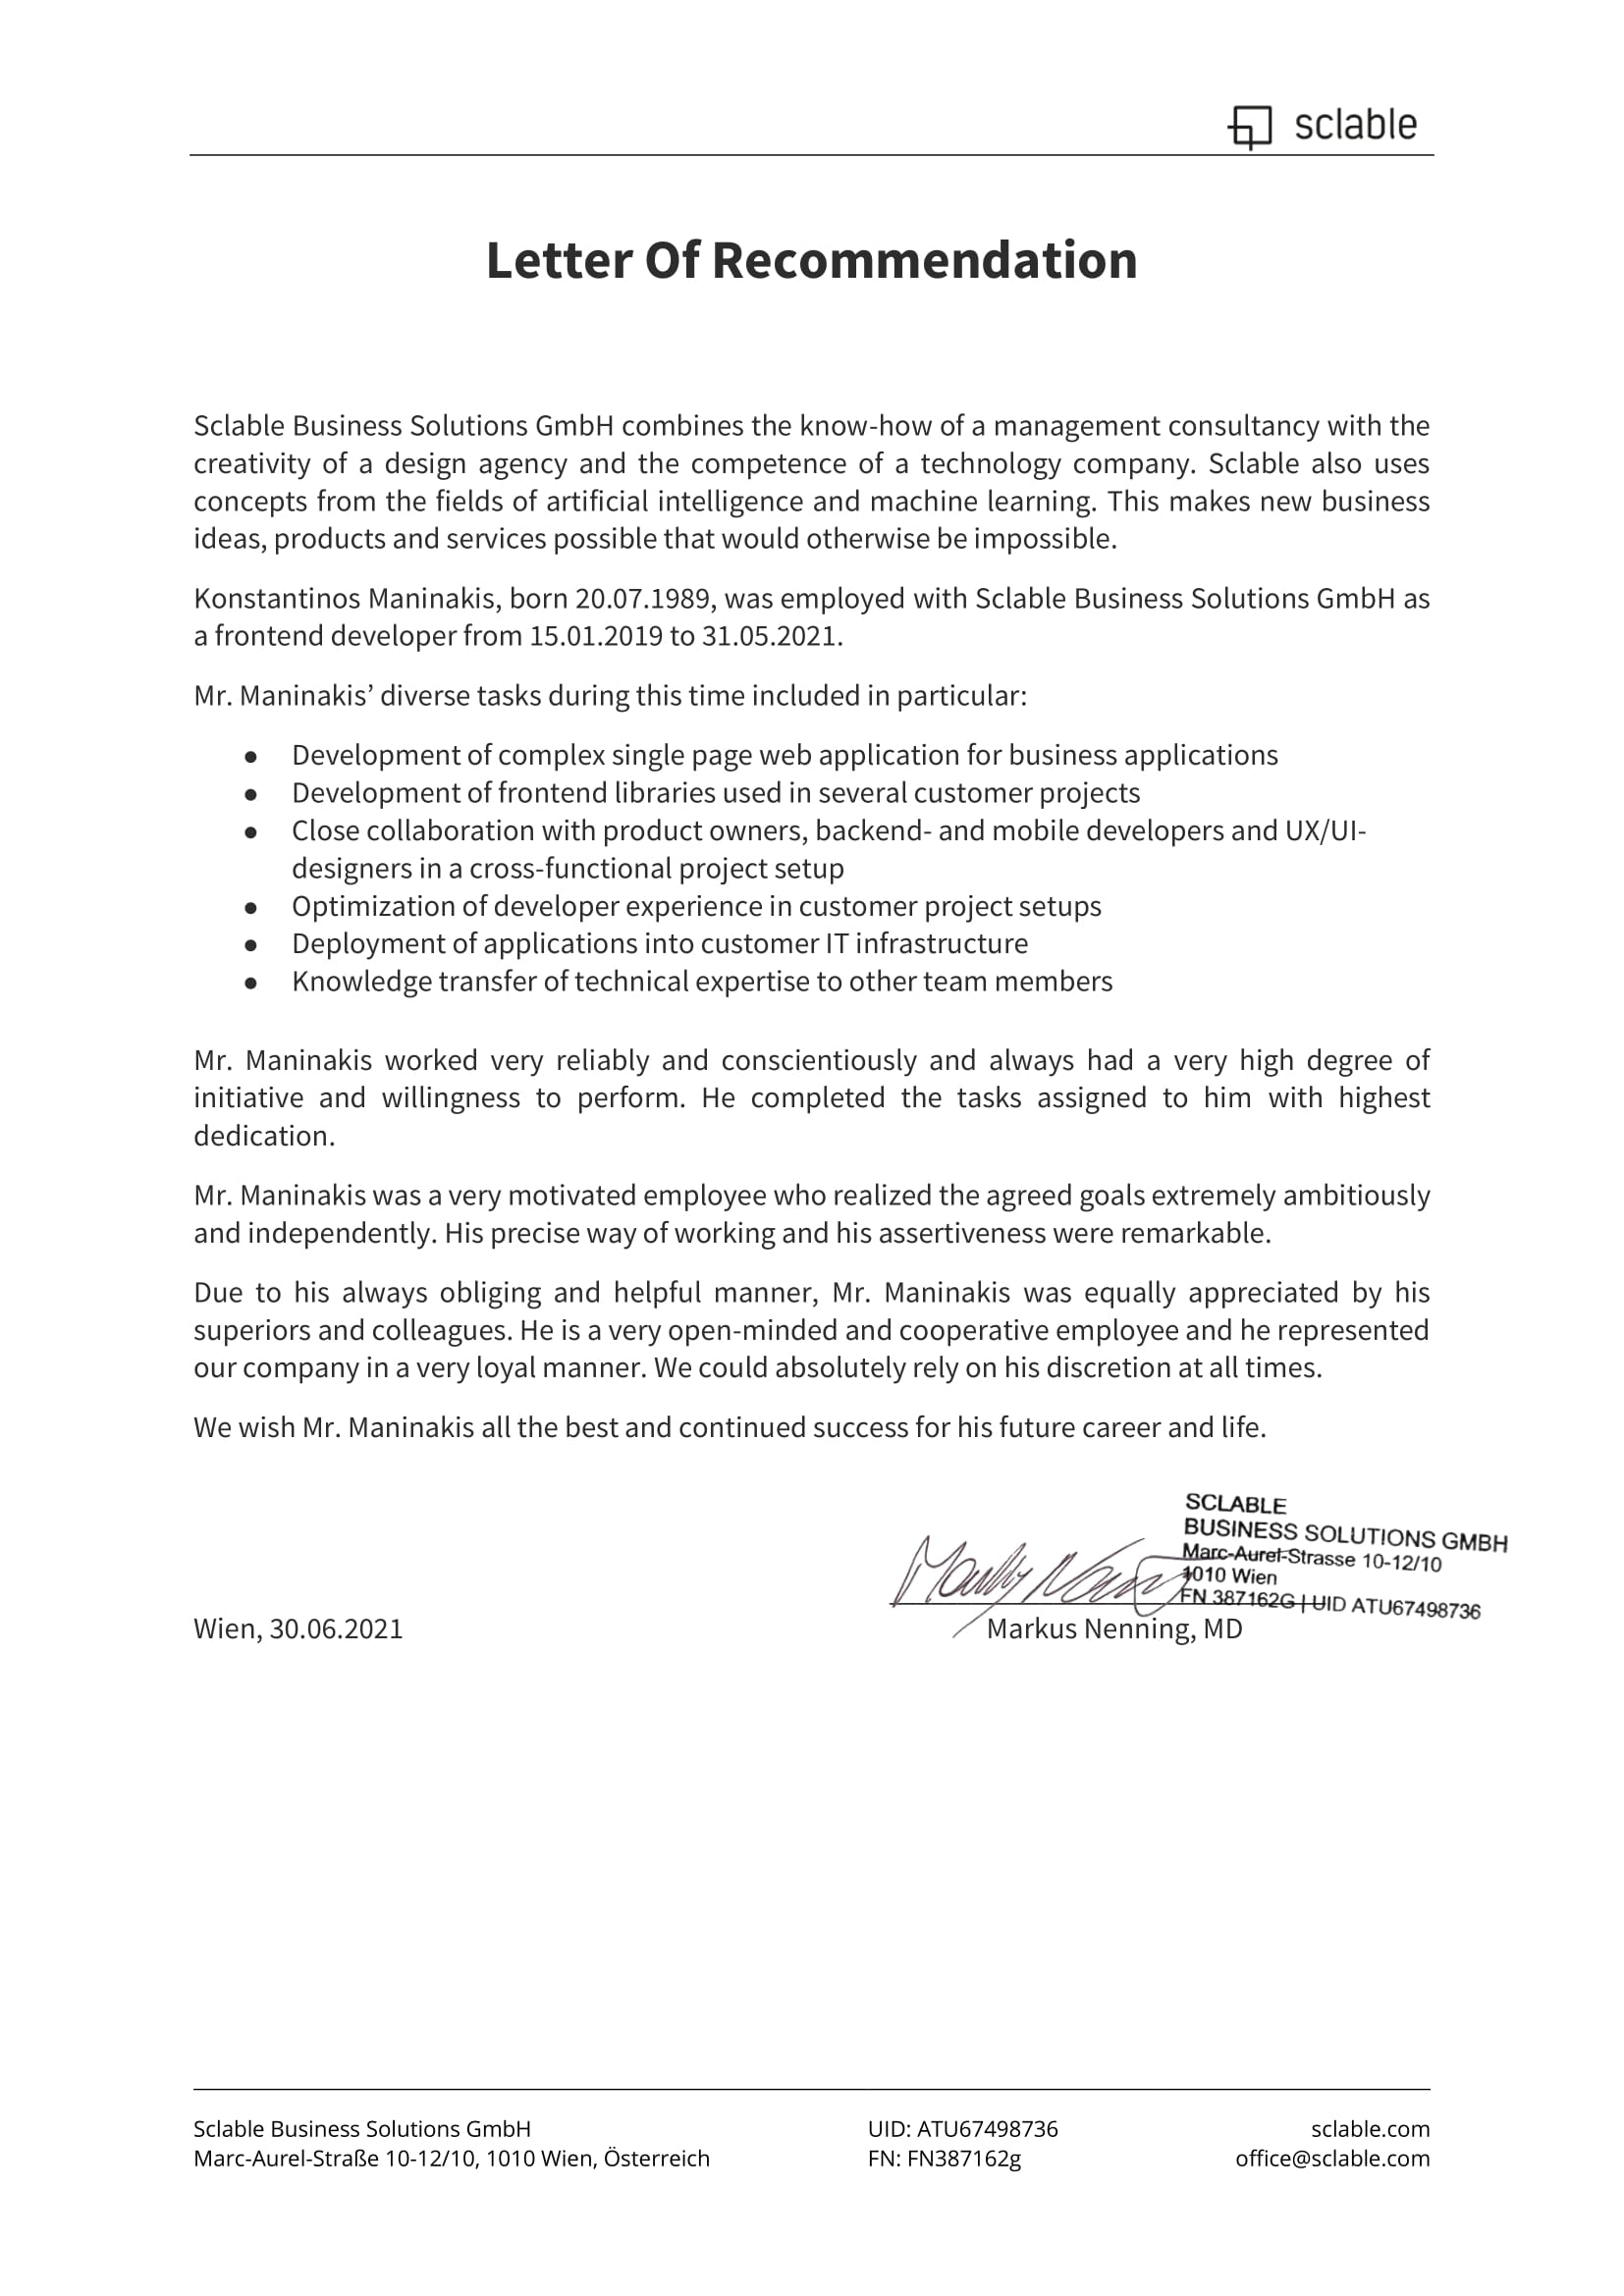 Letter of Recommendation from Sclable